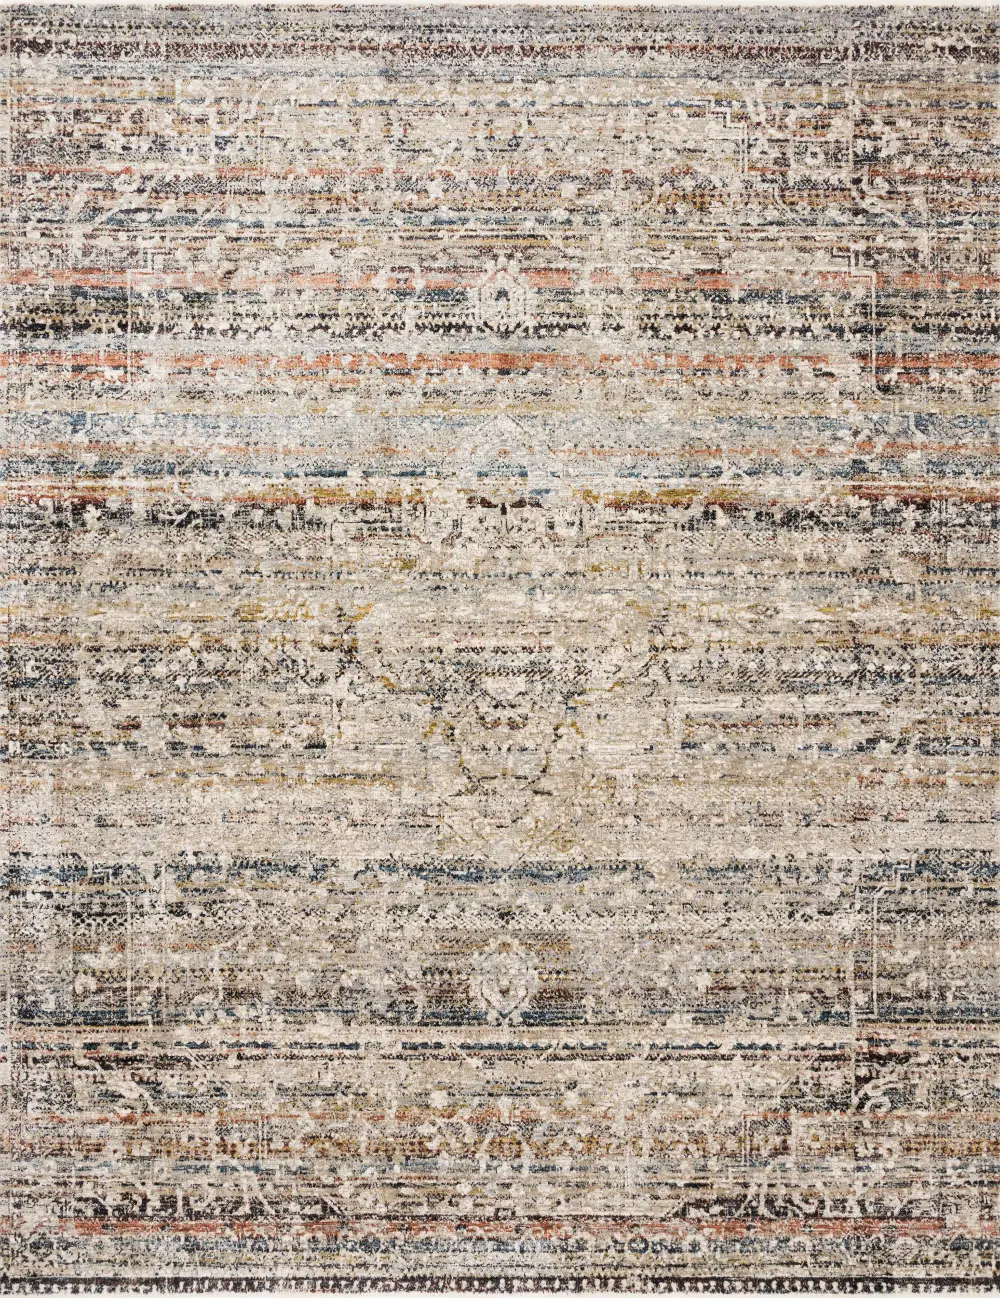 THE-03/8X10/THEIA Theia 8 x 10 Taupe and Multi-Colored Area Rug-1